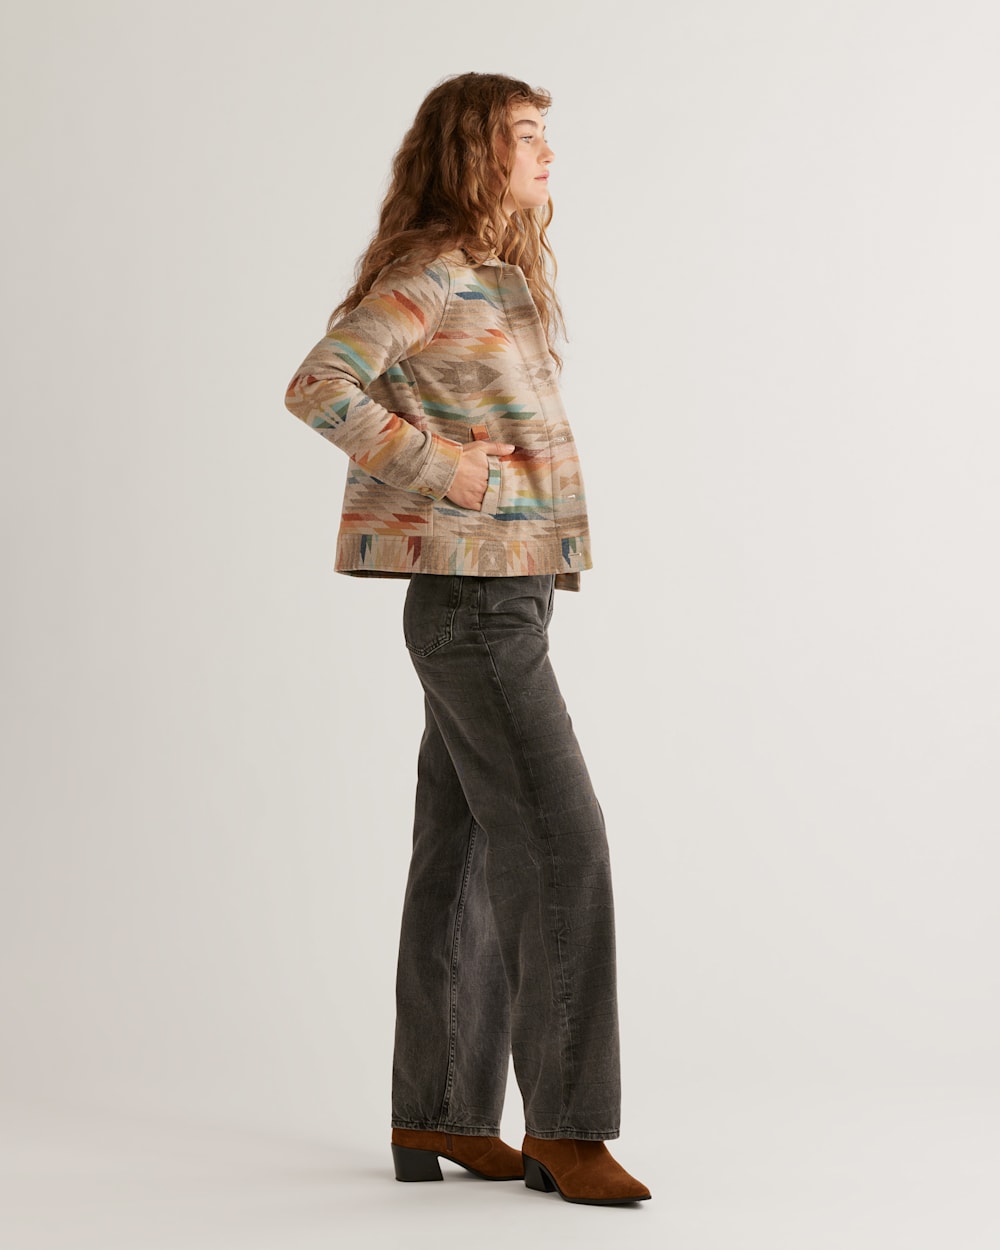 ALTERNATE VIEW OF WOMEN'S WOOL WILLA JACKET IN TAN MIX SUMMERLAND image number 2